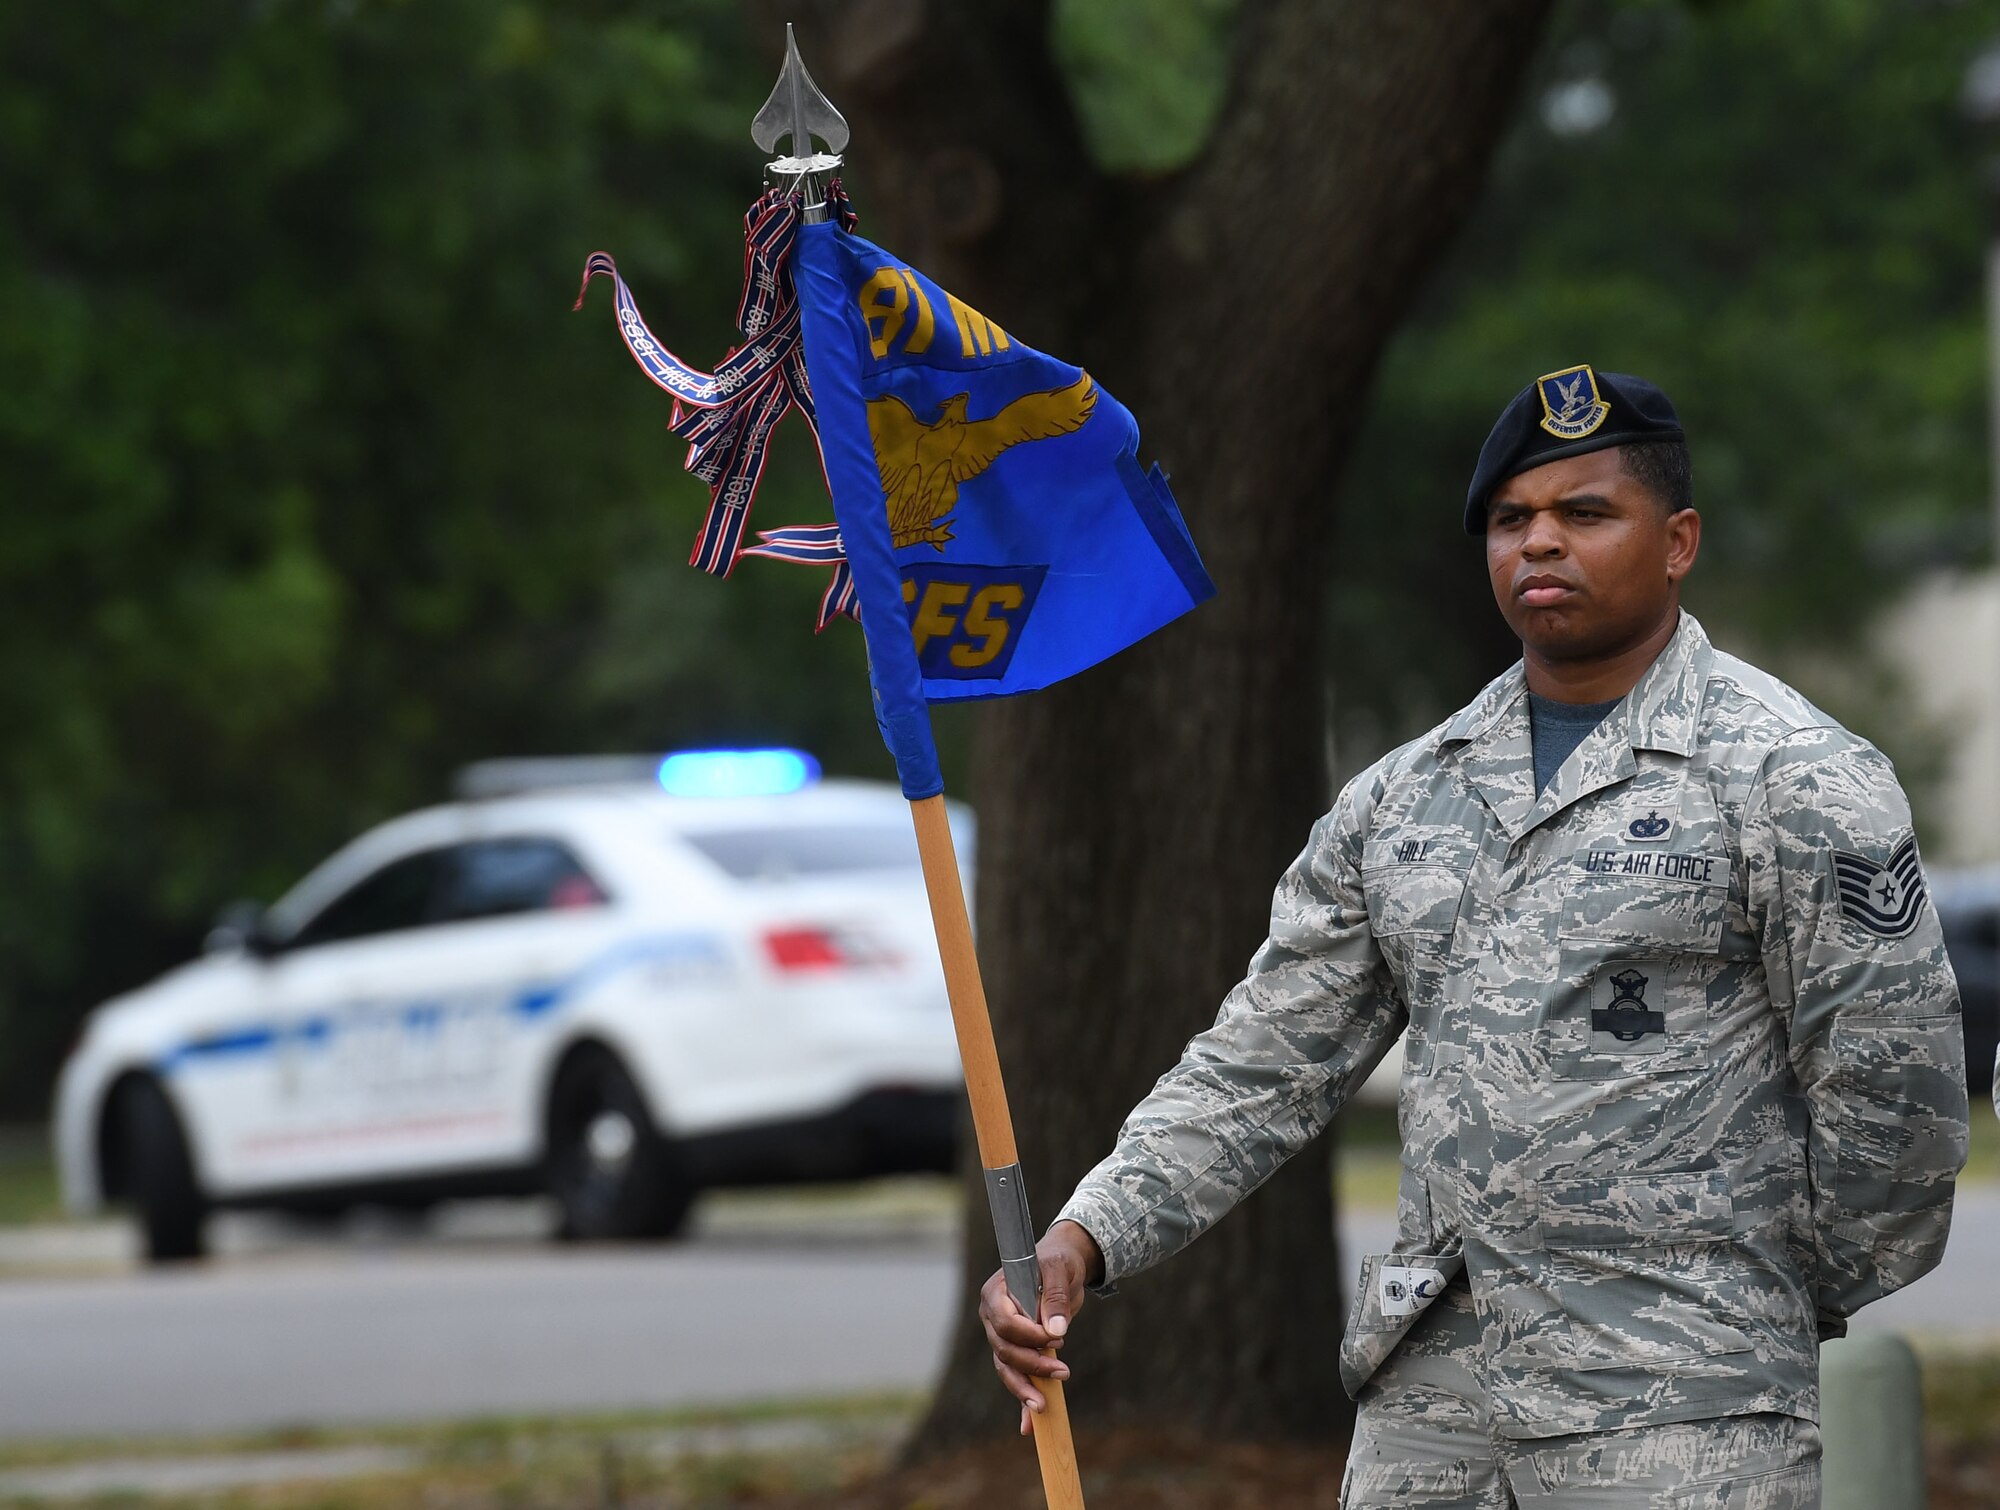 U.S. Air Force Tech. Sgt. Courtney Hill, 81st Security Forces Squadron commander support staff NCO in charge, holds the 81st SFS guidon during the 81st SFS retreat ceremony at Keesler Air Force Base, Mississippi, May 18, 2018. The event was held during National Police Week, which recognizes the service of law enforcement men and women who put their lives at risk every day. (U.S. Air Force photo by Kemberly Groue)